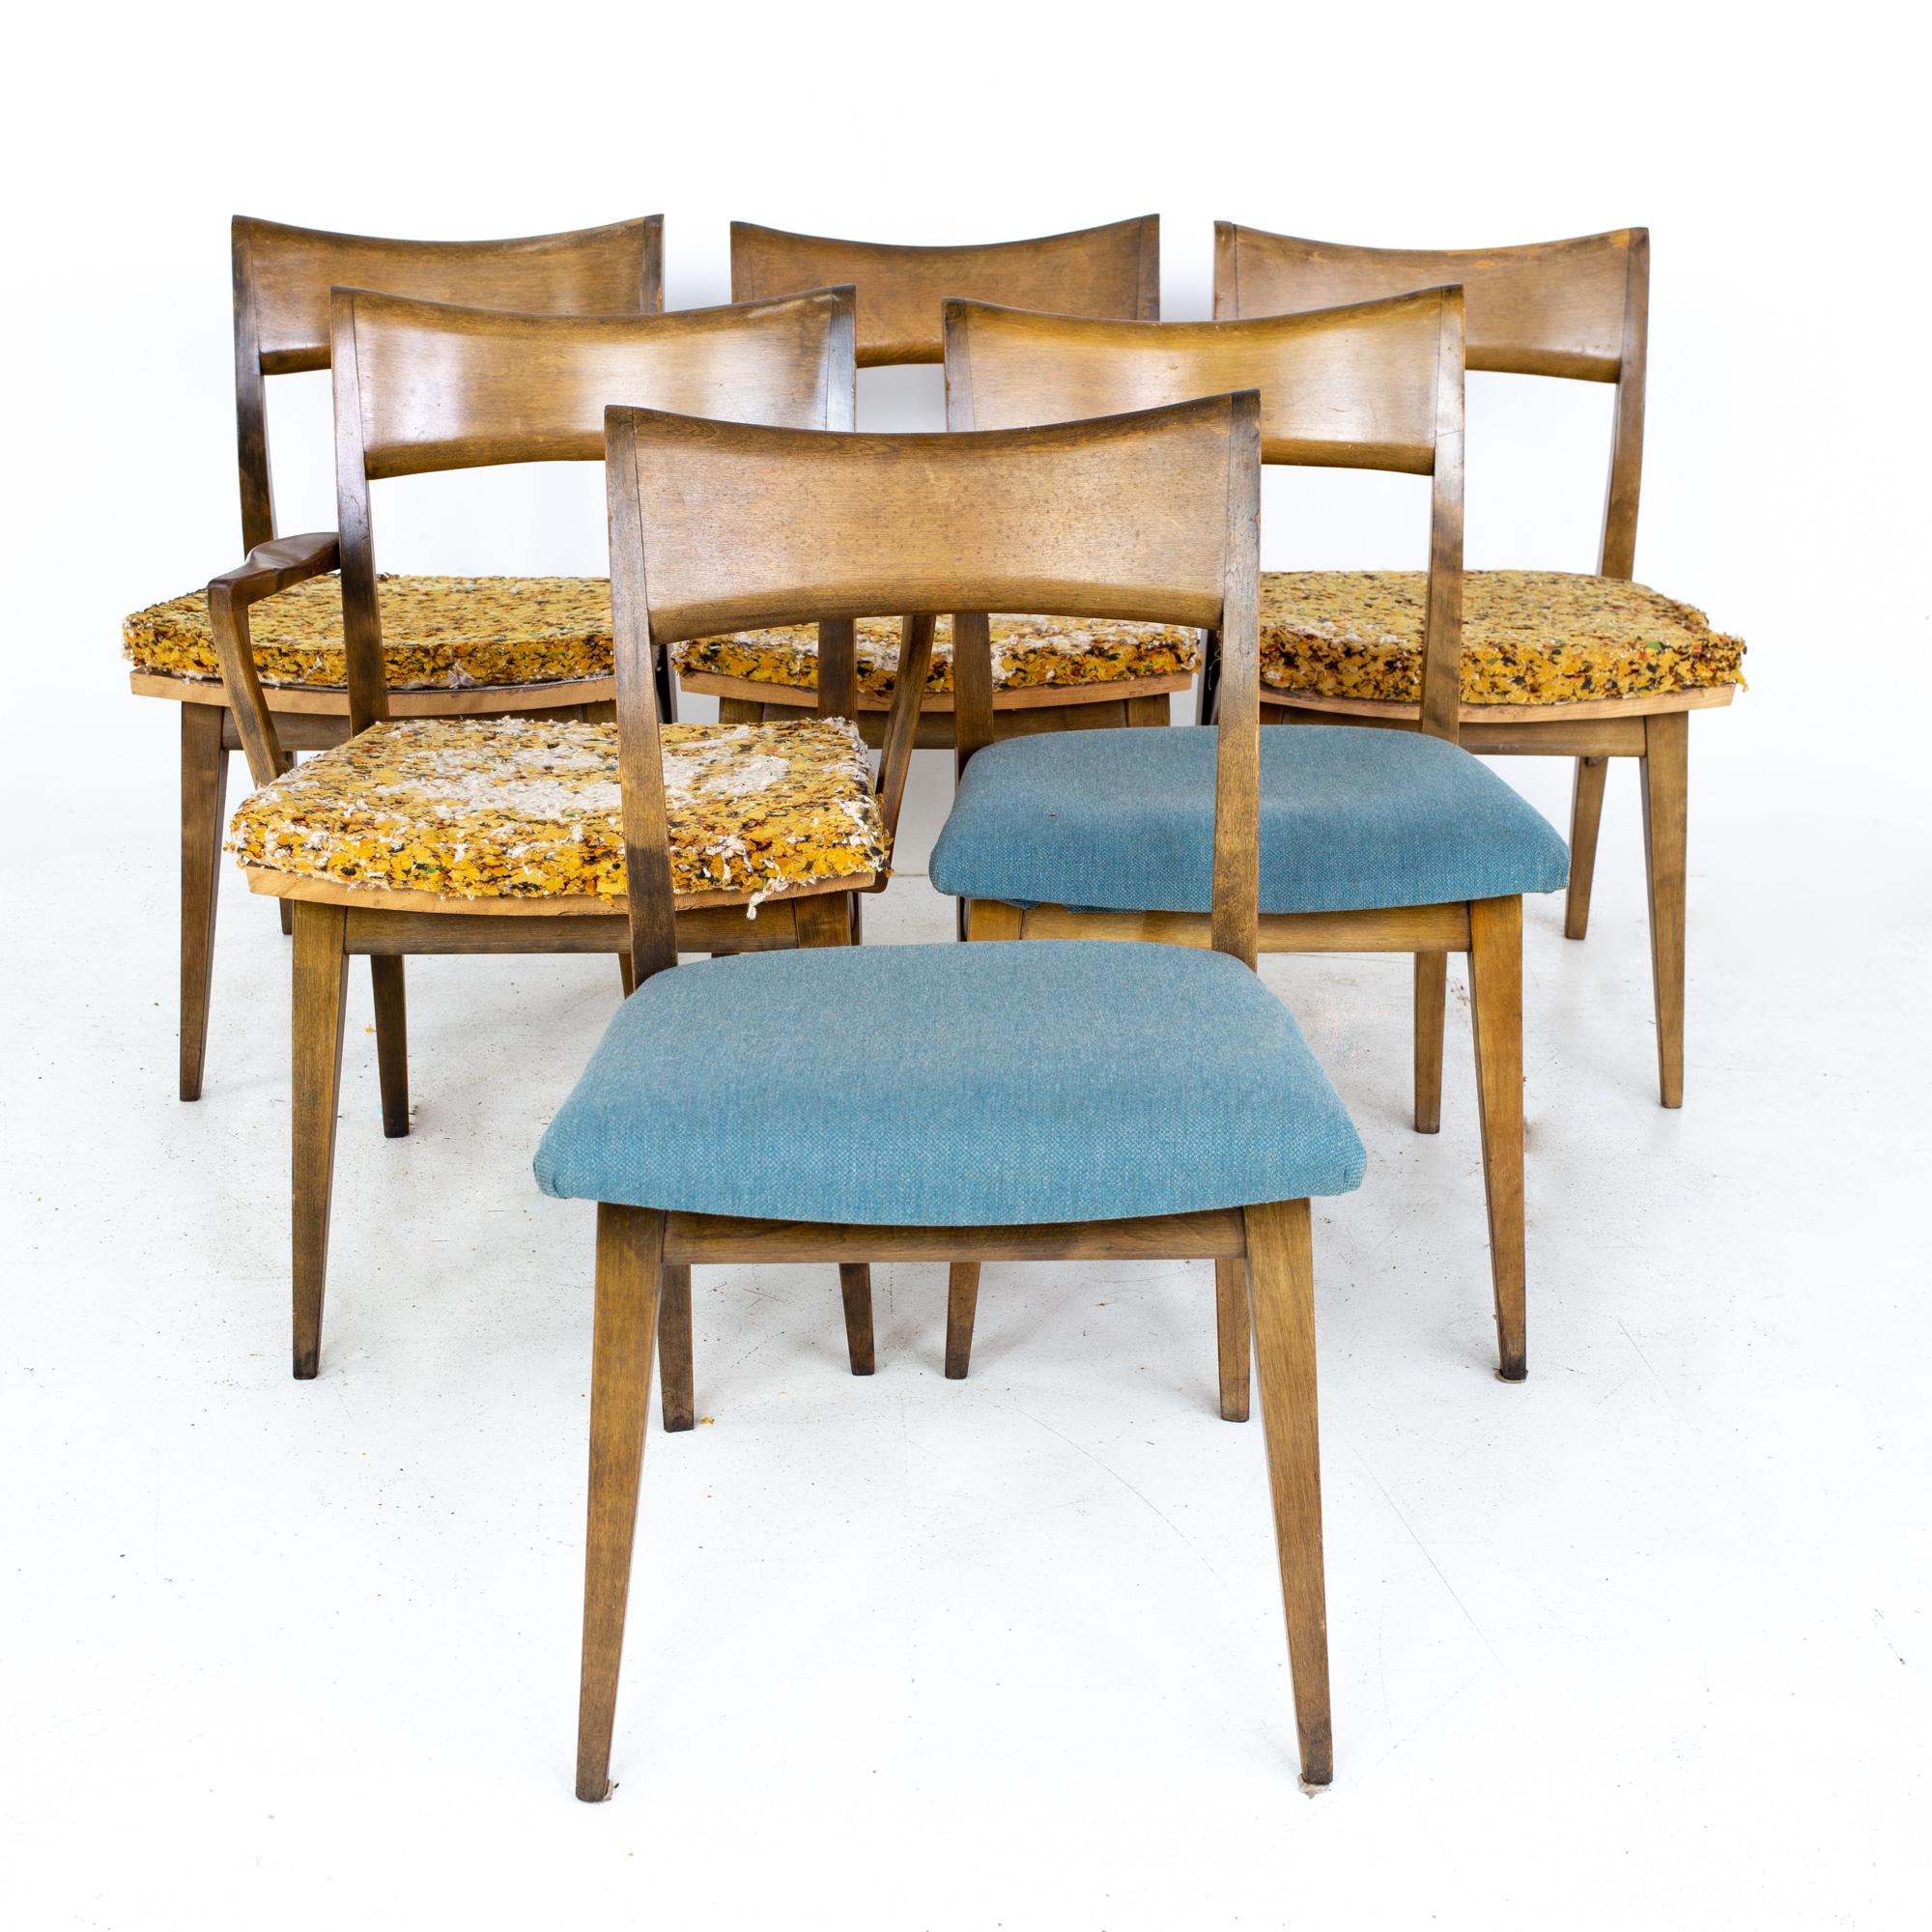 Heywood Wakefield mid century tuxedo dining chairs - Set of 6
Each chair measures: 19 wide x 21 deep x 31.75 high, with a seat height of 18 inches and arm height of 24.5 inches

Ready for new upholstery

All pieces of furniture can be had in